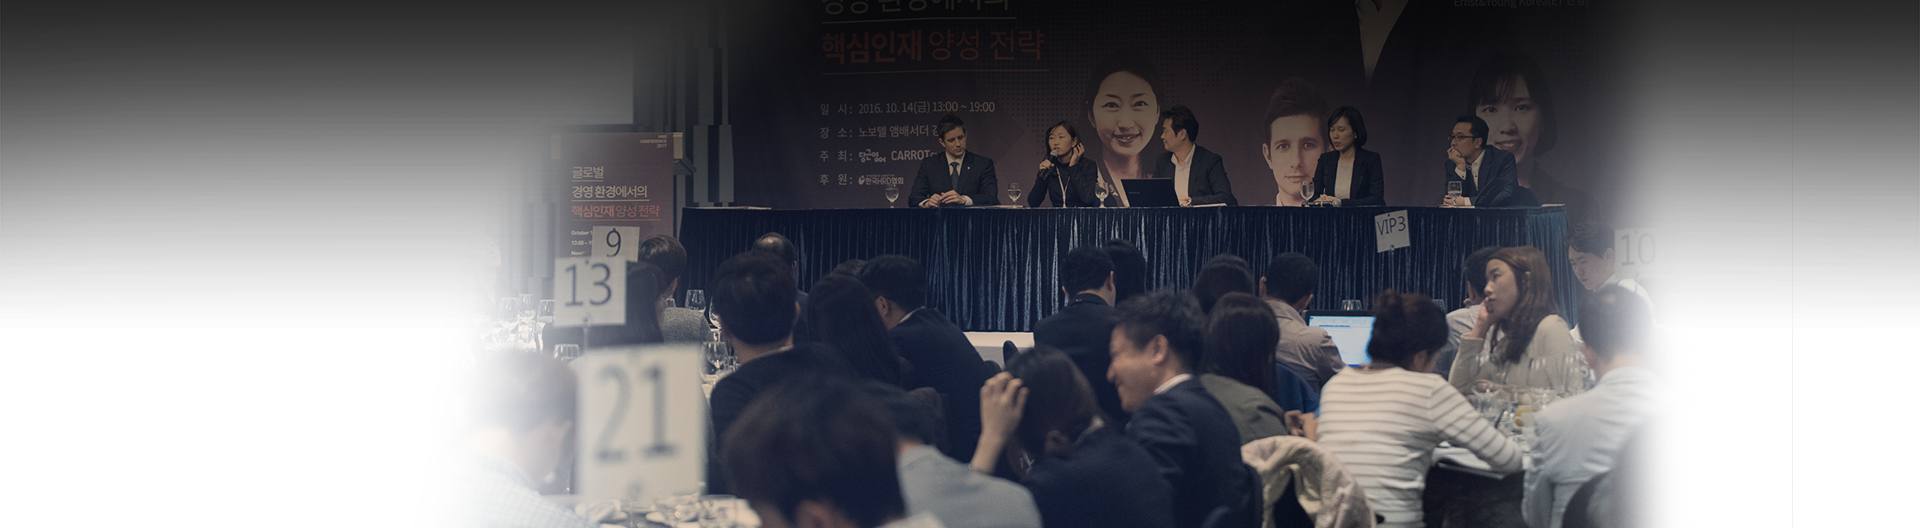 HRD CONFERENCE 이미지